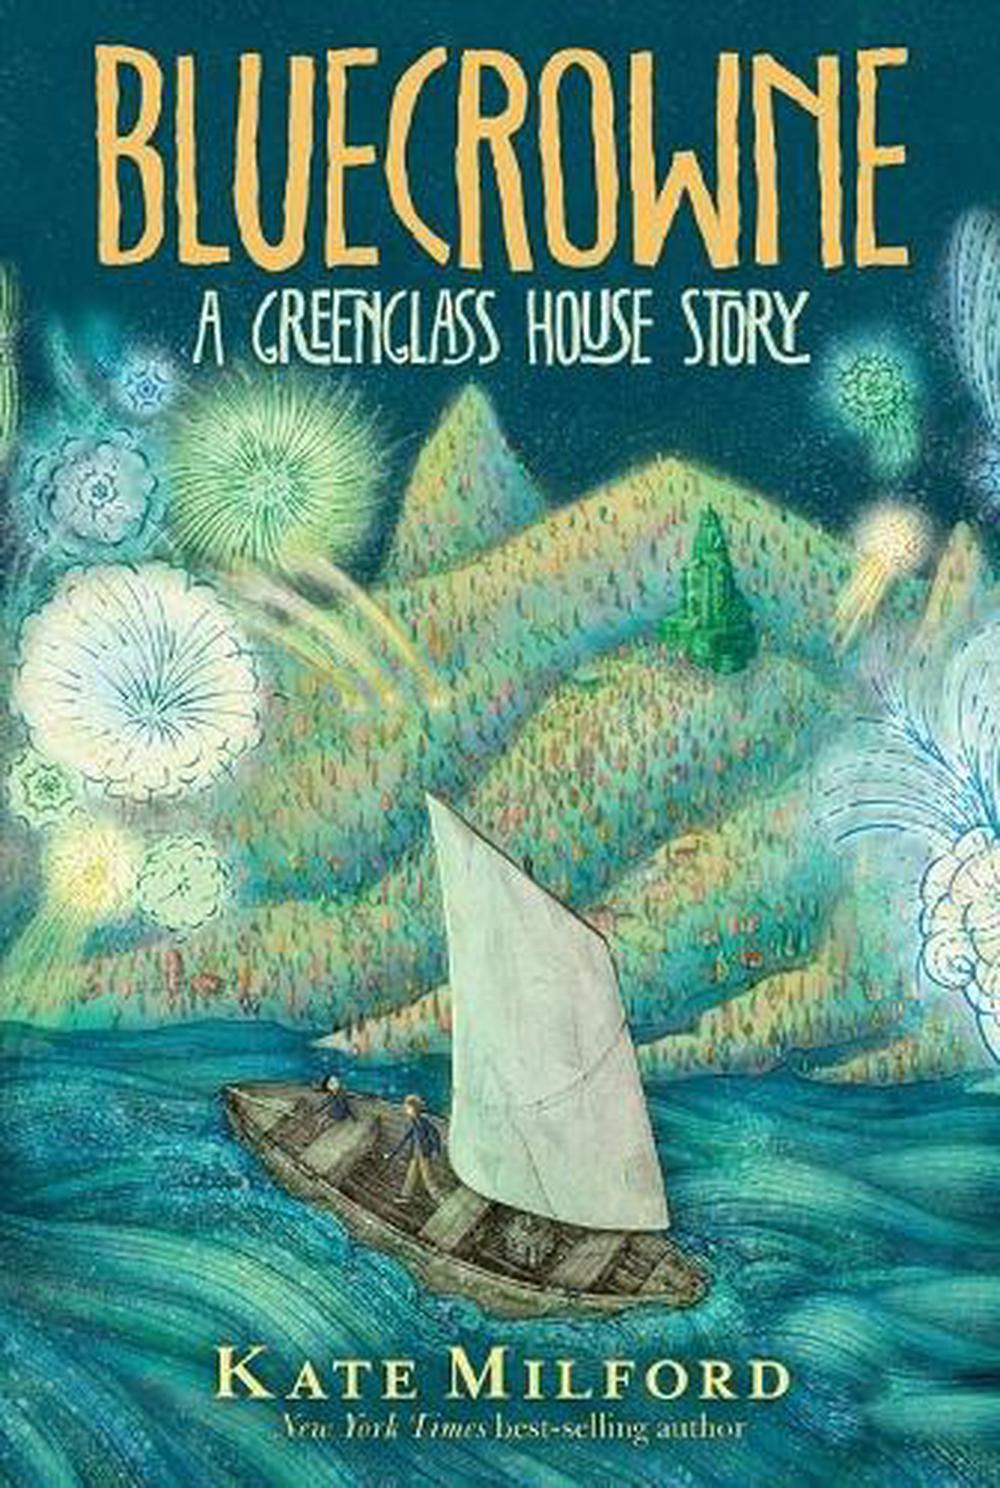 the thief knot a greenglass house story